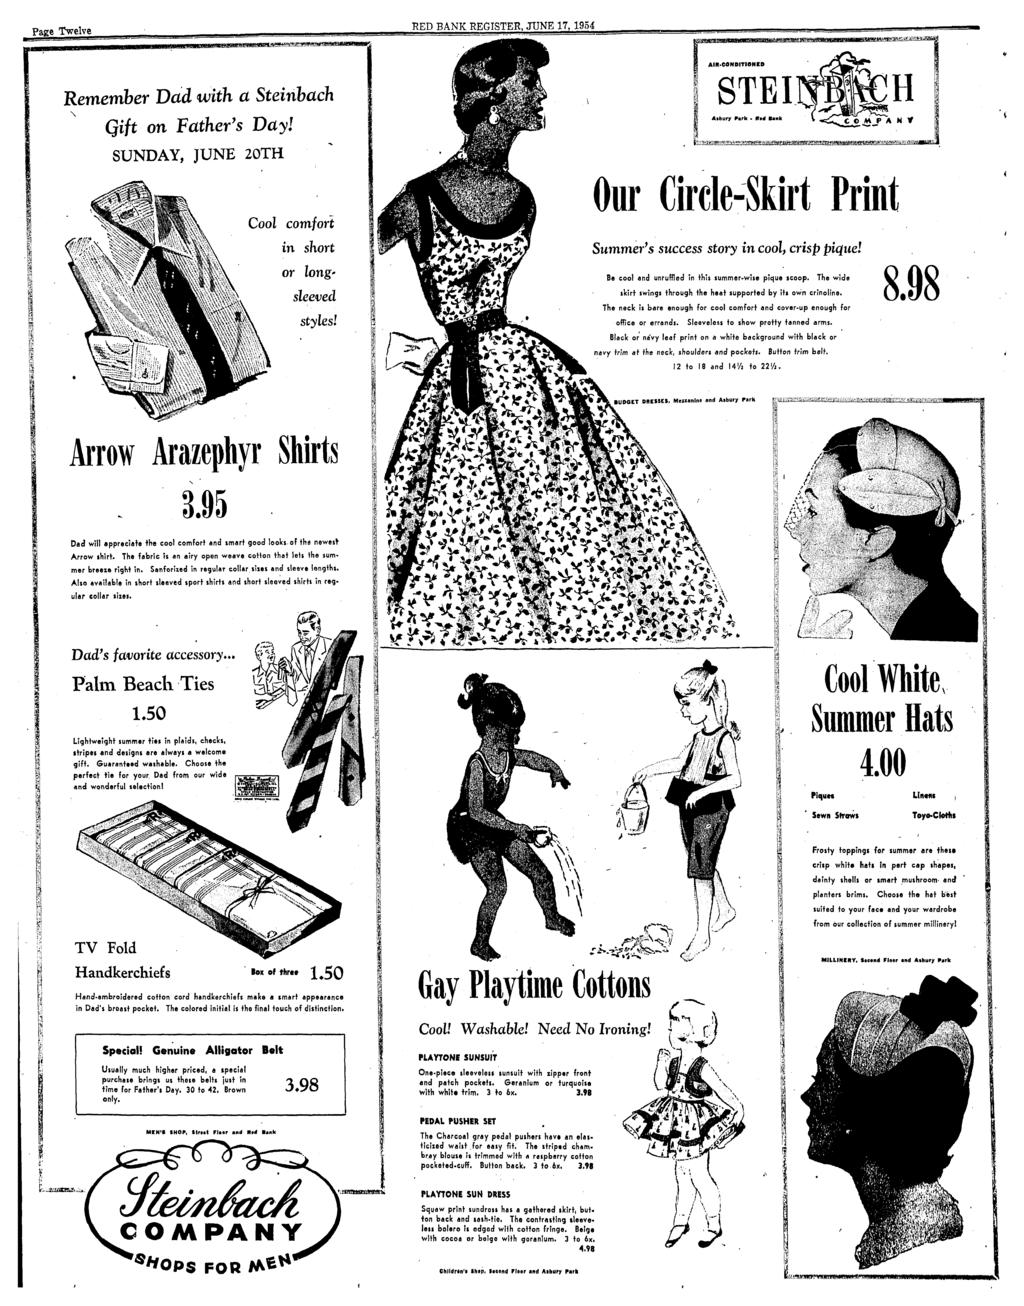 RED BANK REGISTER, JUNE 17, 1954 Remember Dctd with ct Steinbach Qift on Father's Day! STEI Albury Park. Rid Bank SUNDAY, JUNE 20TH Cool comfort in short or long' sleeved styles!